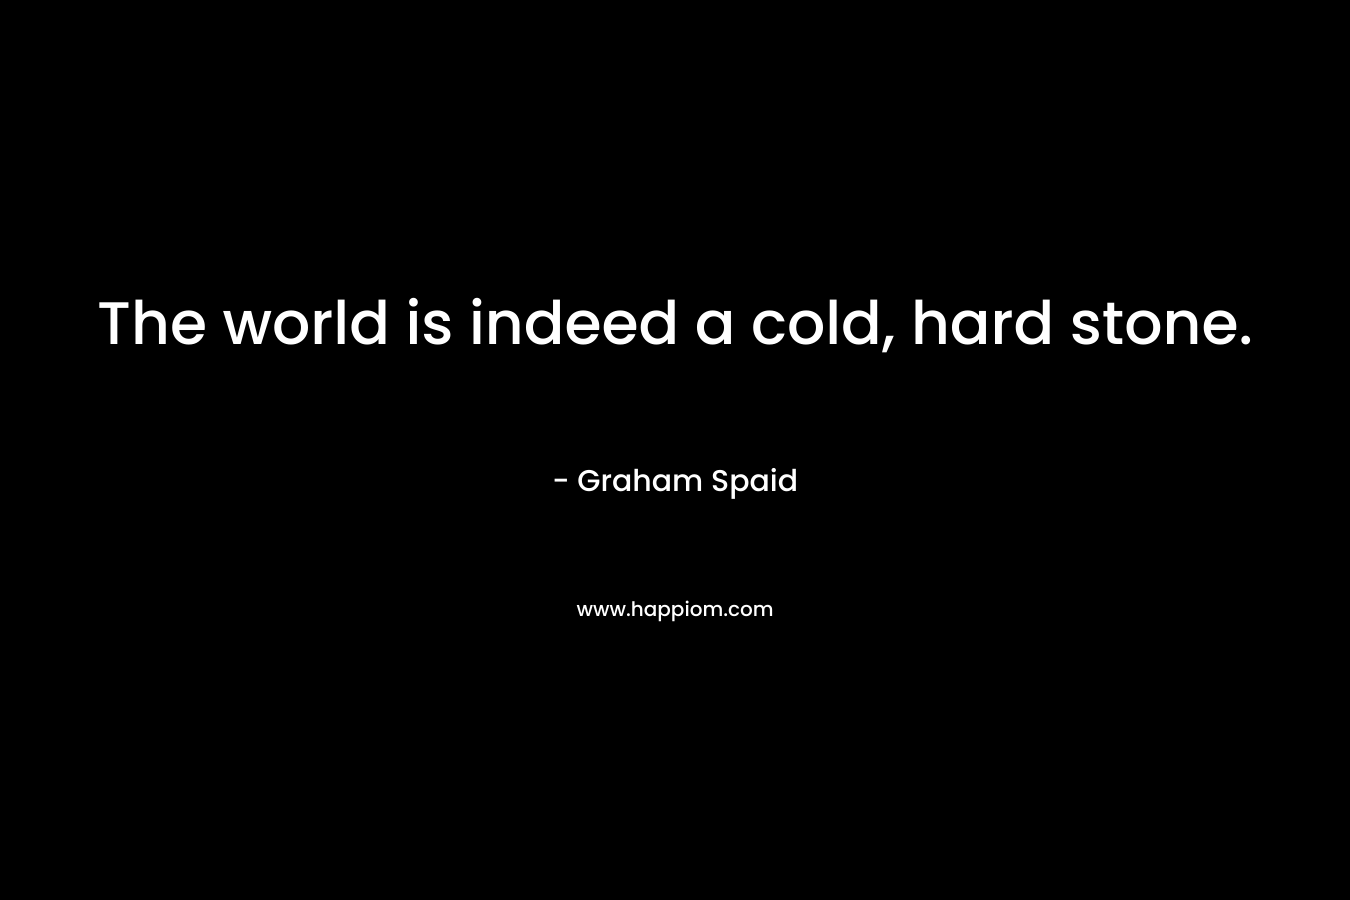 The world is indeed a cold, hard stone. – Graham Spaid